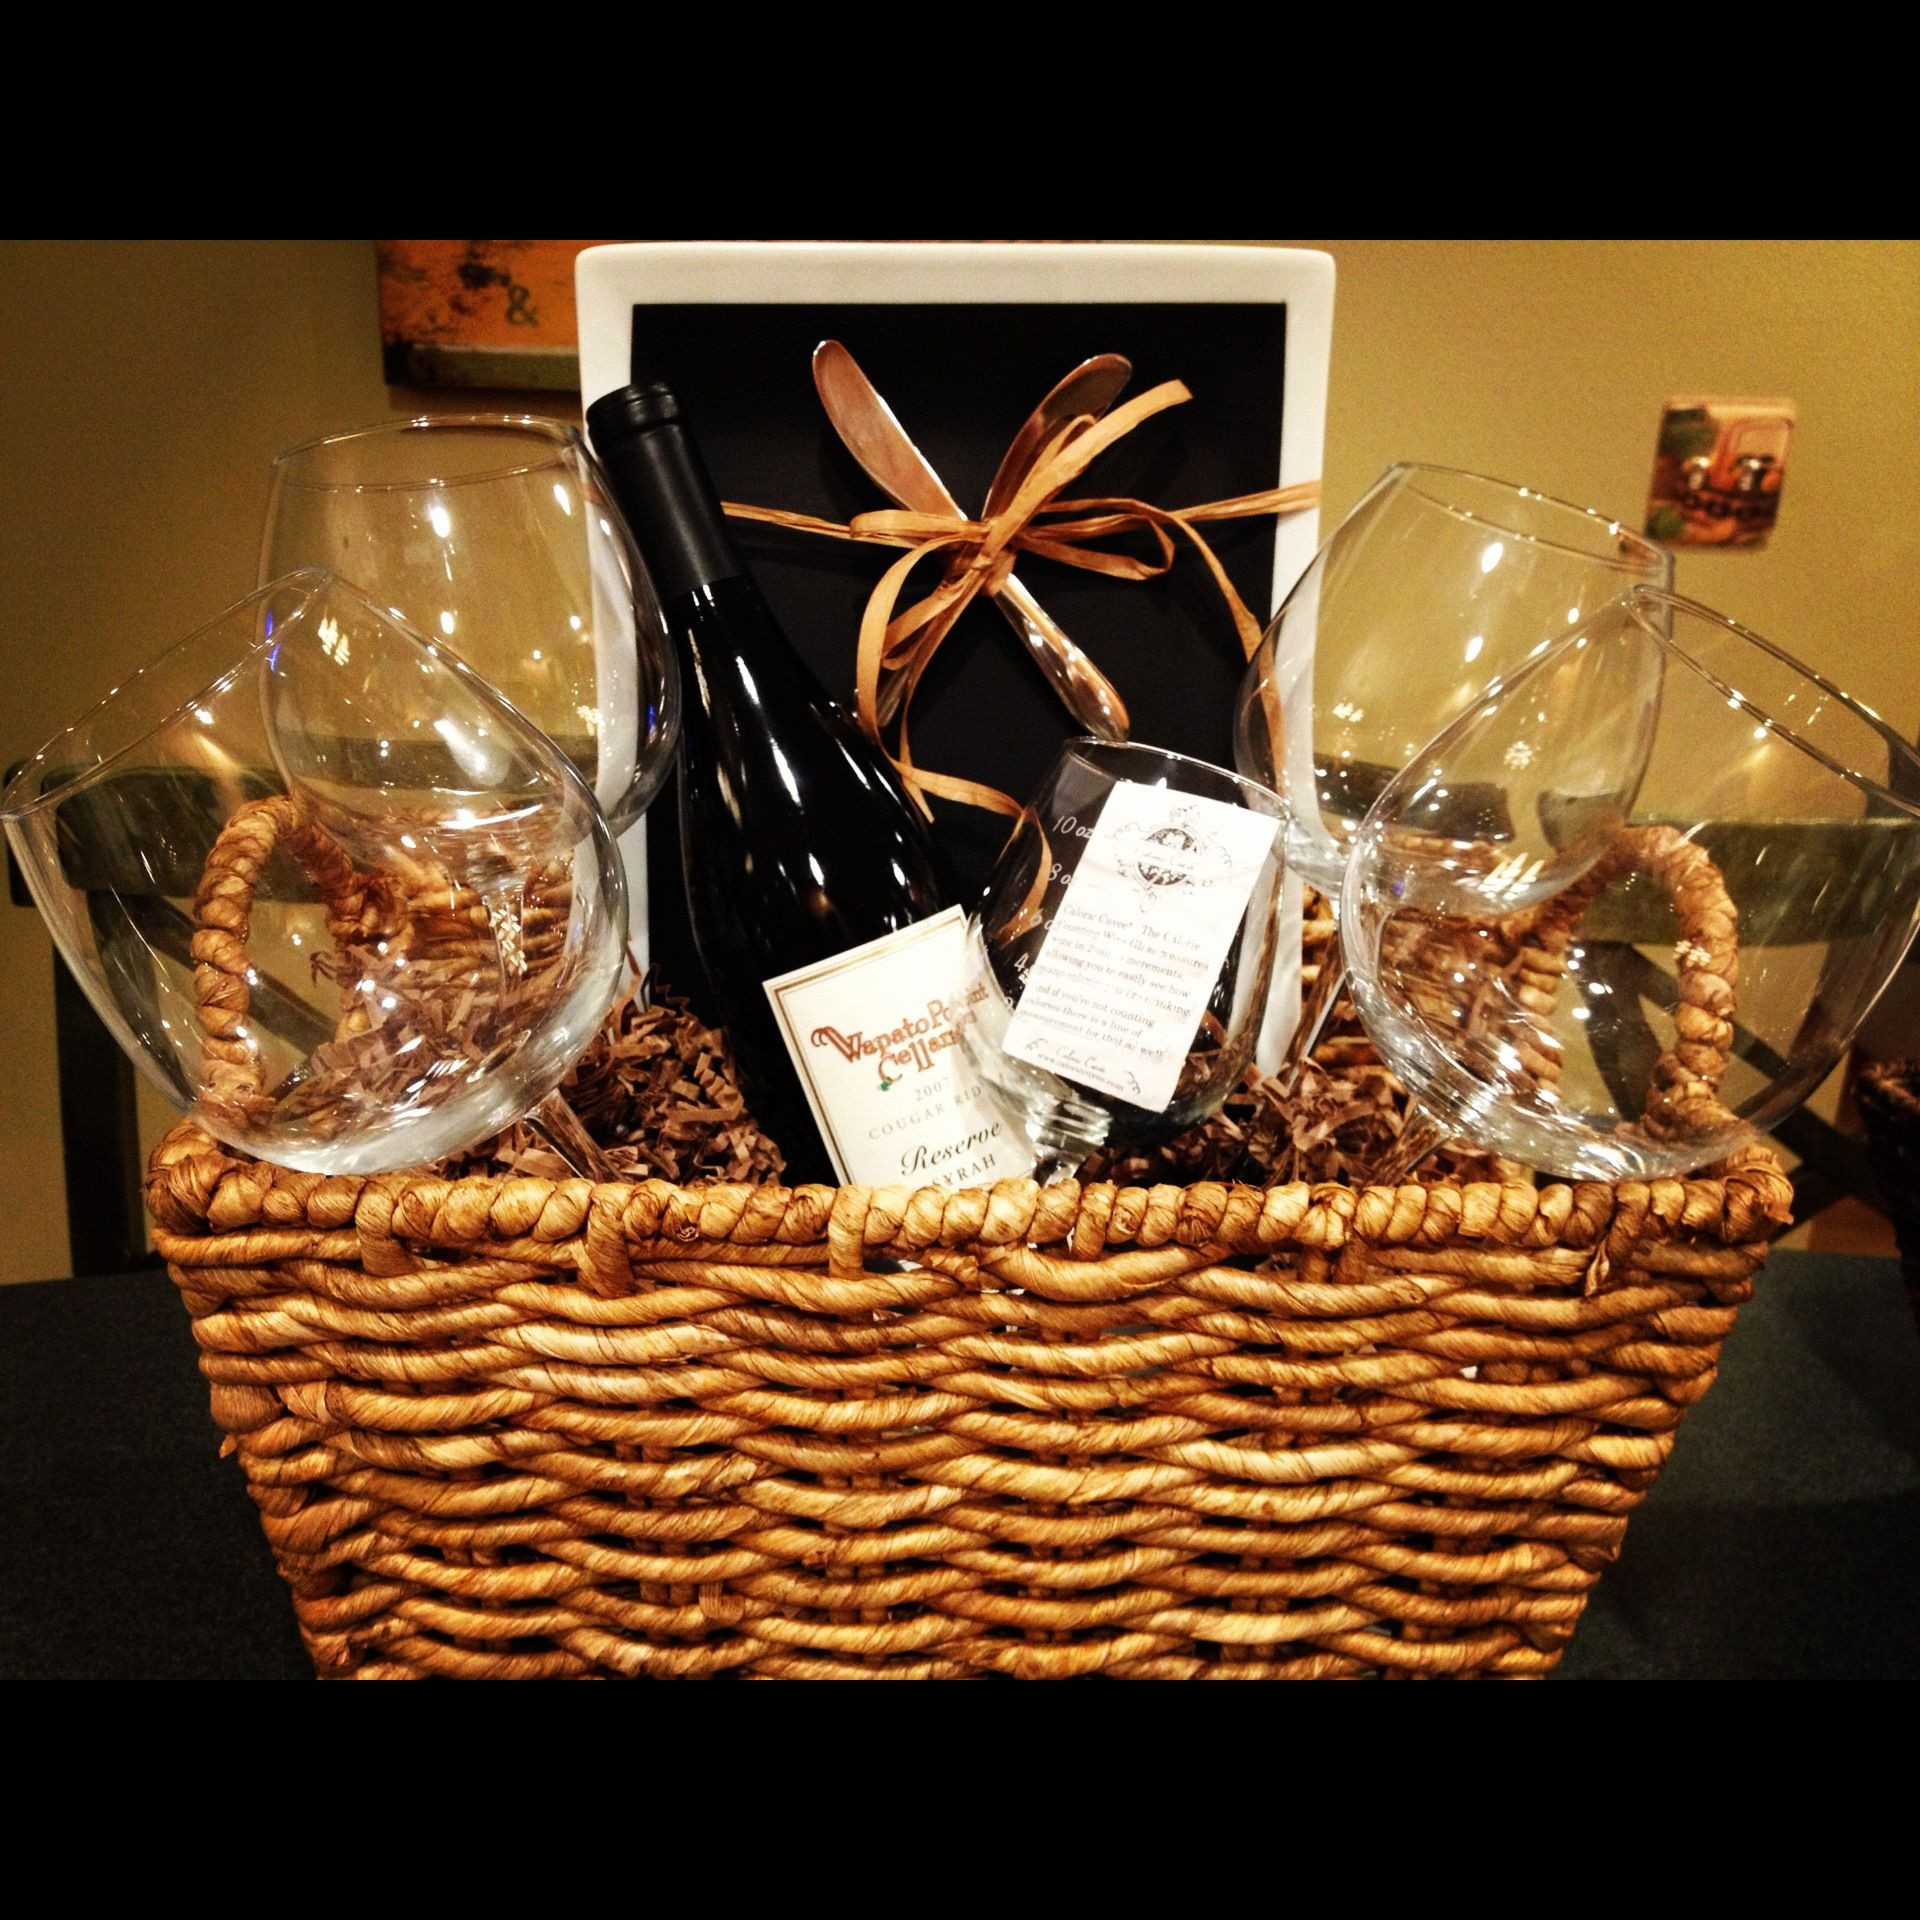 Wine And Cheese Gift Basket Ideas
 DIY wine t basket for shower throwers 1 or 2 bottles